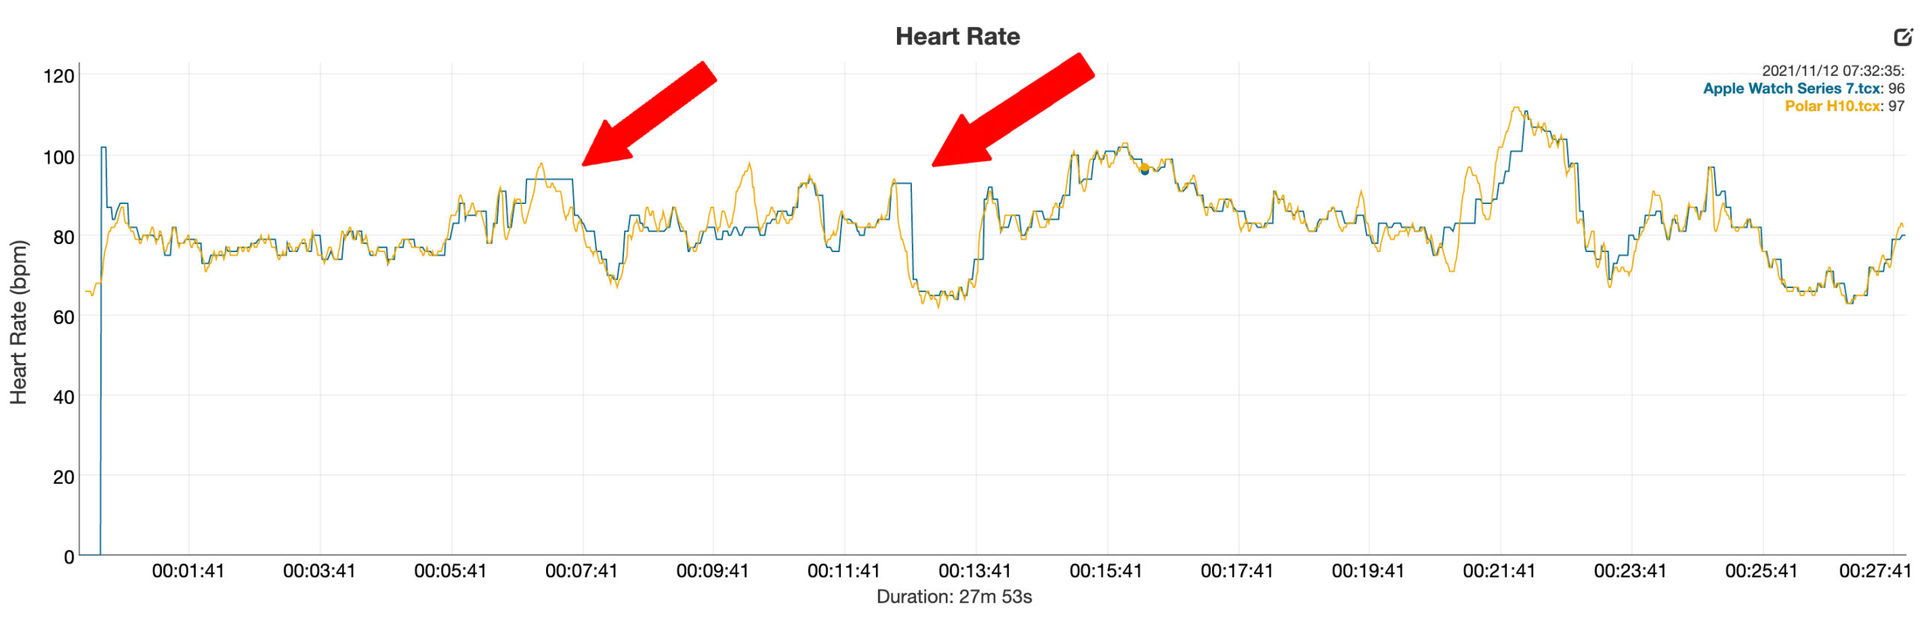 Apple Watch Series 7 review heart rate data vs Polar H10 chest strap yoga with arrows